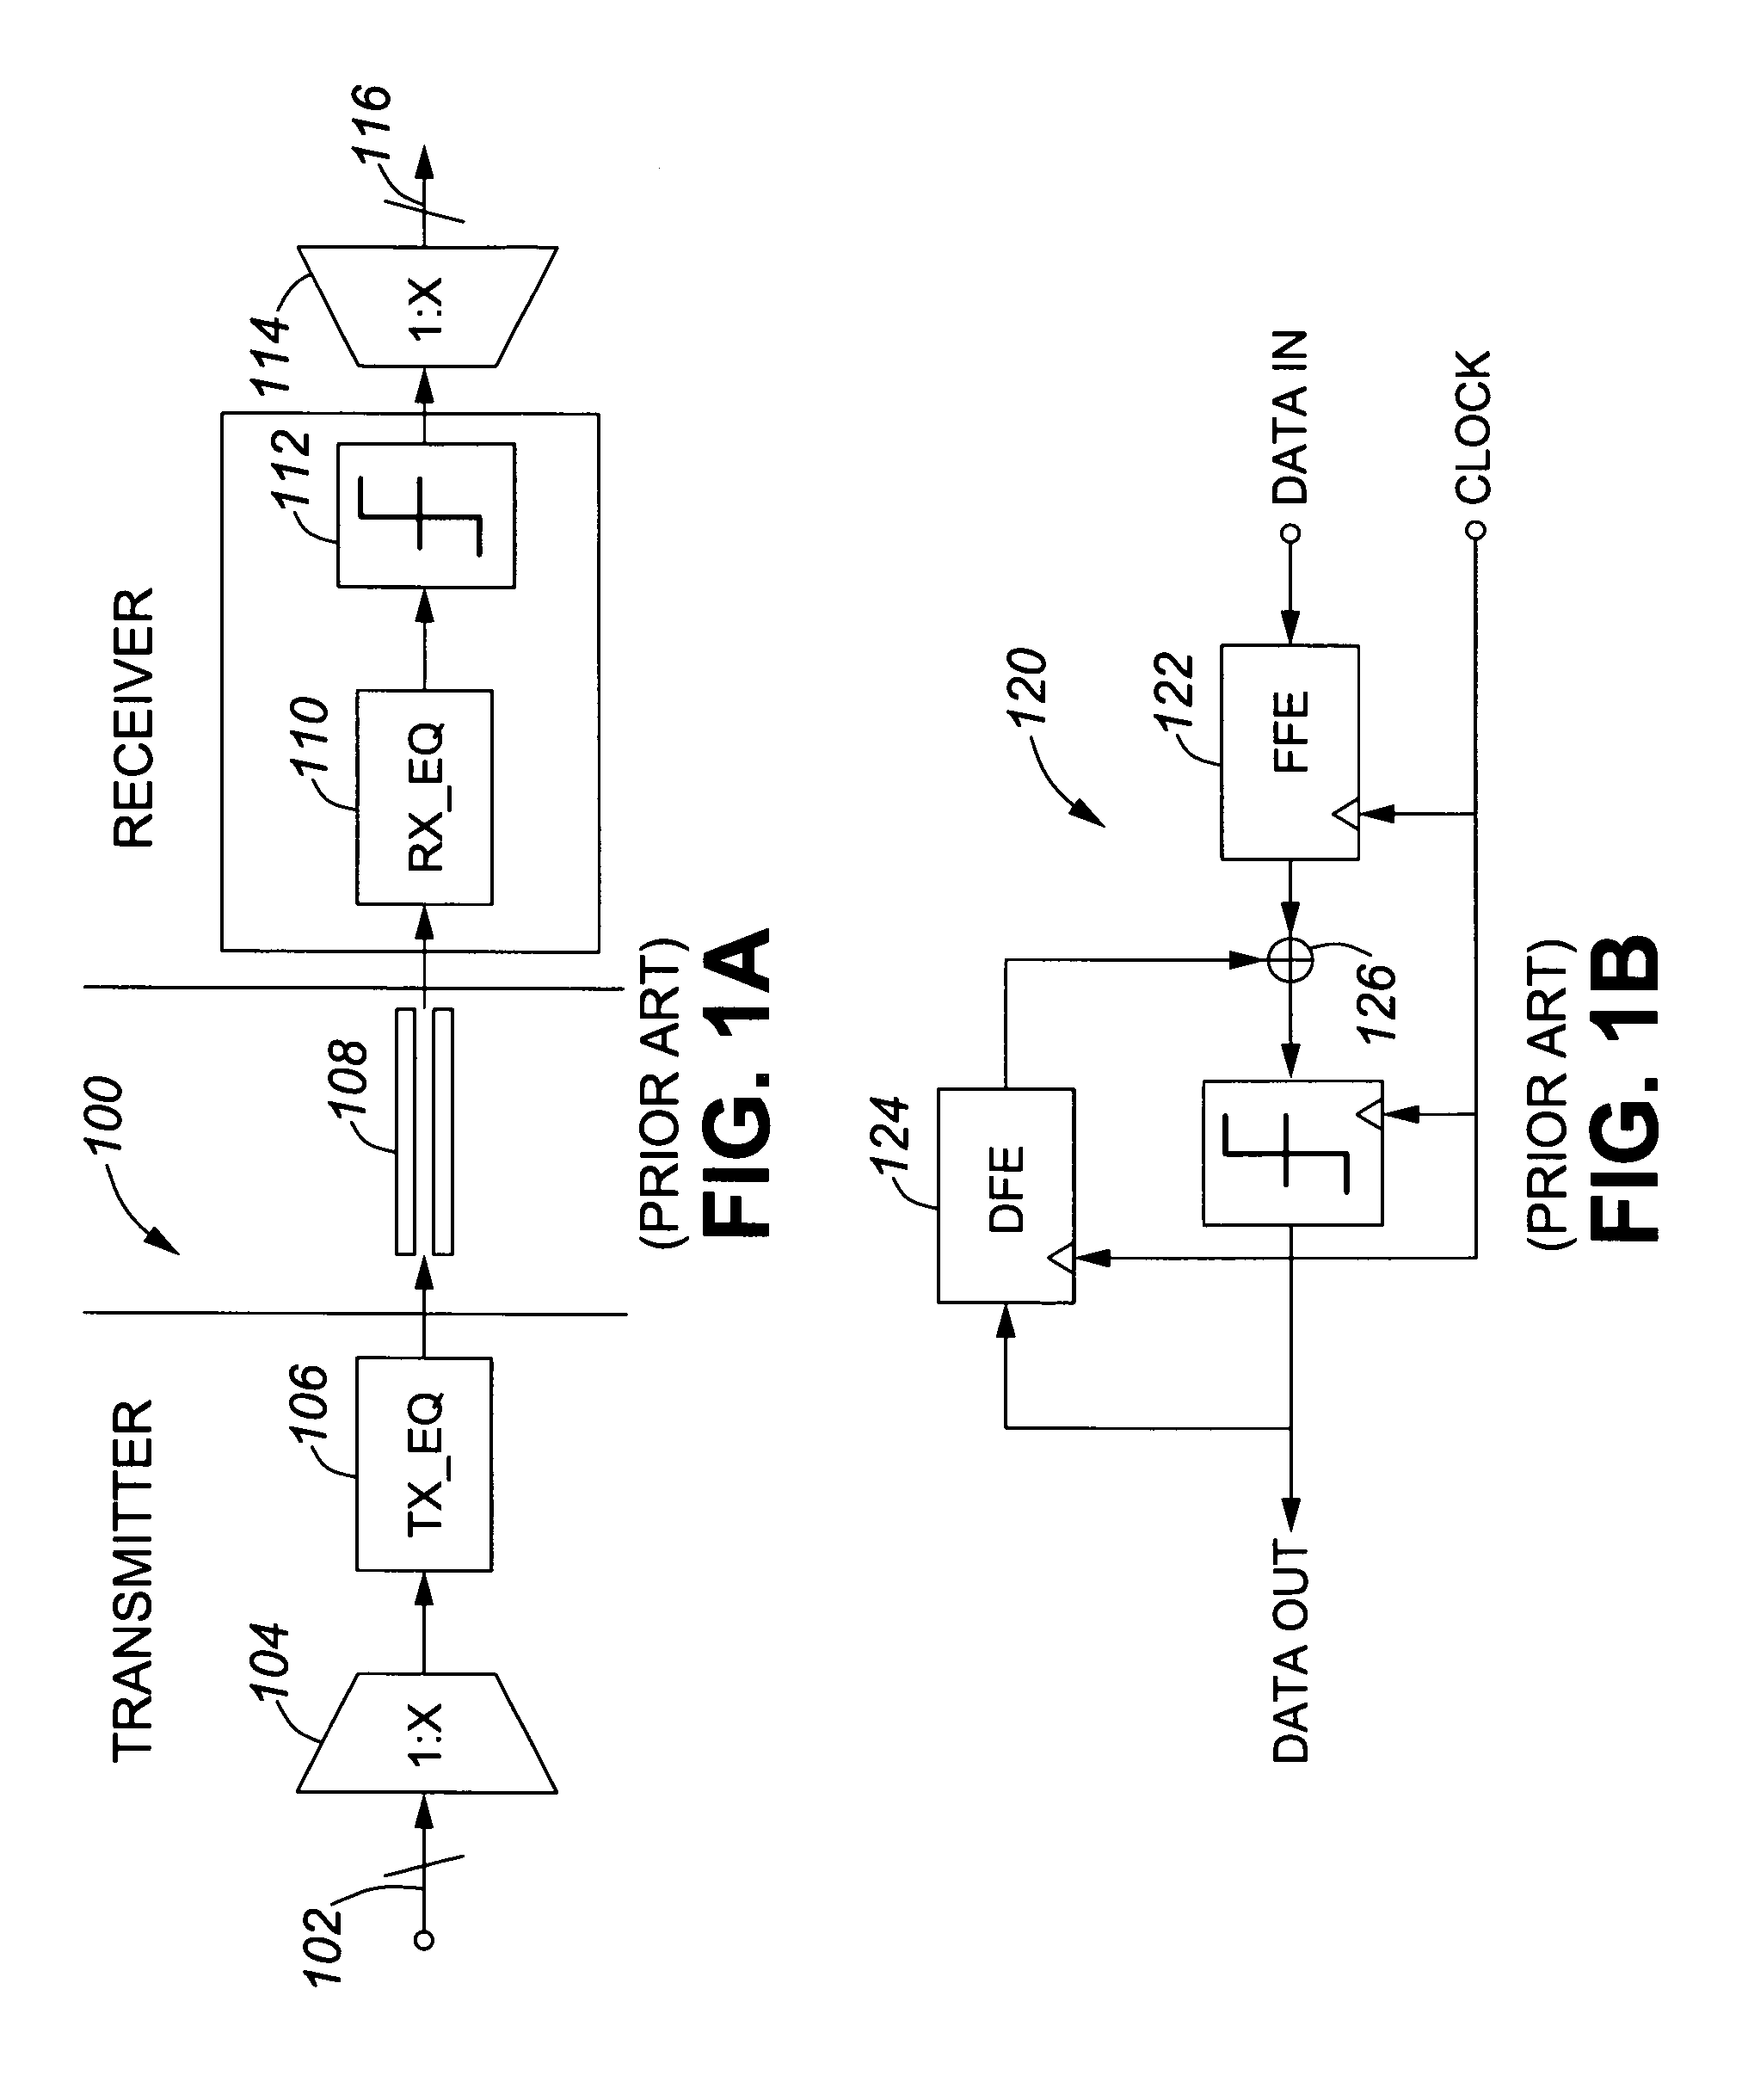 Fully adaptive equalization for high loss communications channels